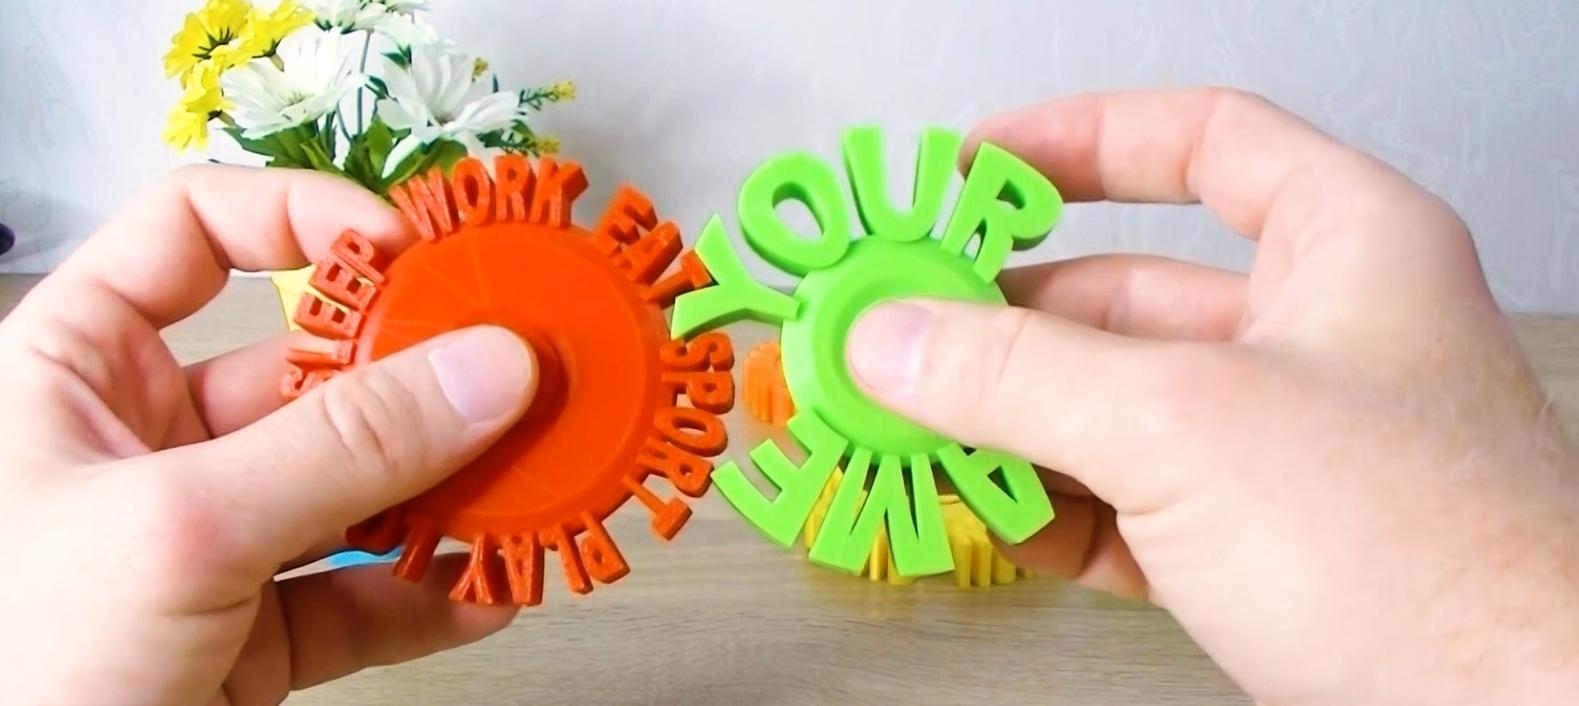 APP TO CREATE TEXT SPINNERS 3d model